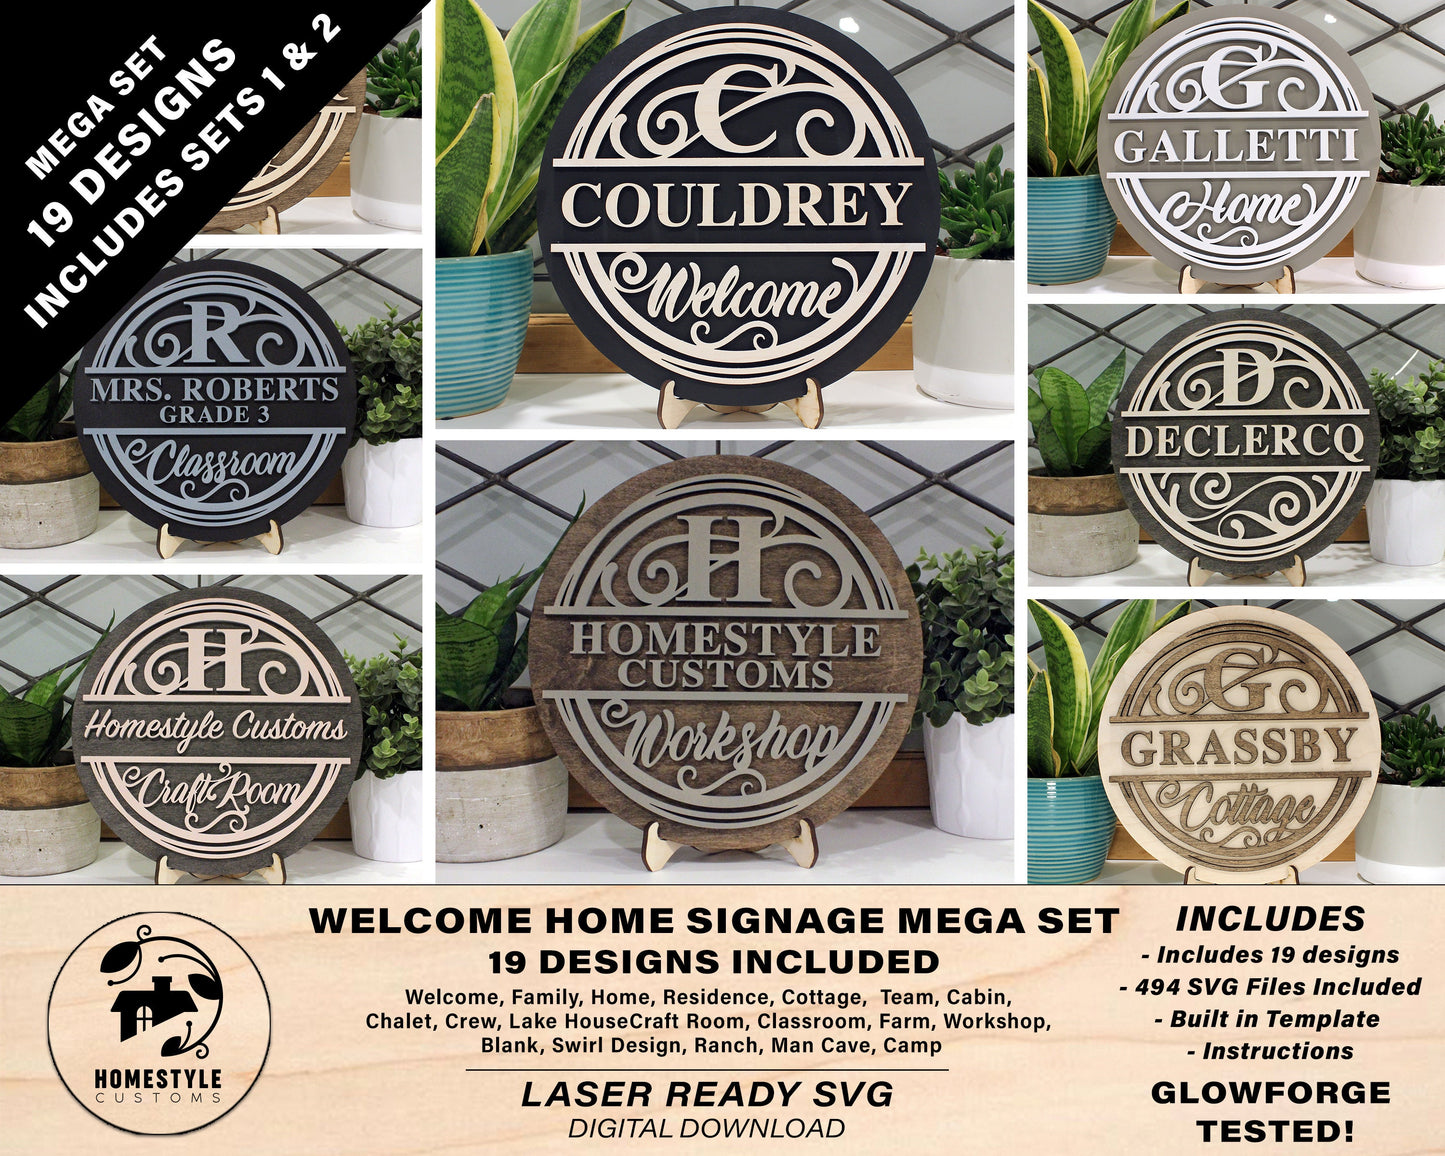 Personalized Home Signage Mega Set - 19 Designs Included - 494 files - Built in Template - SVG File Download - Sized for Glowforge